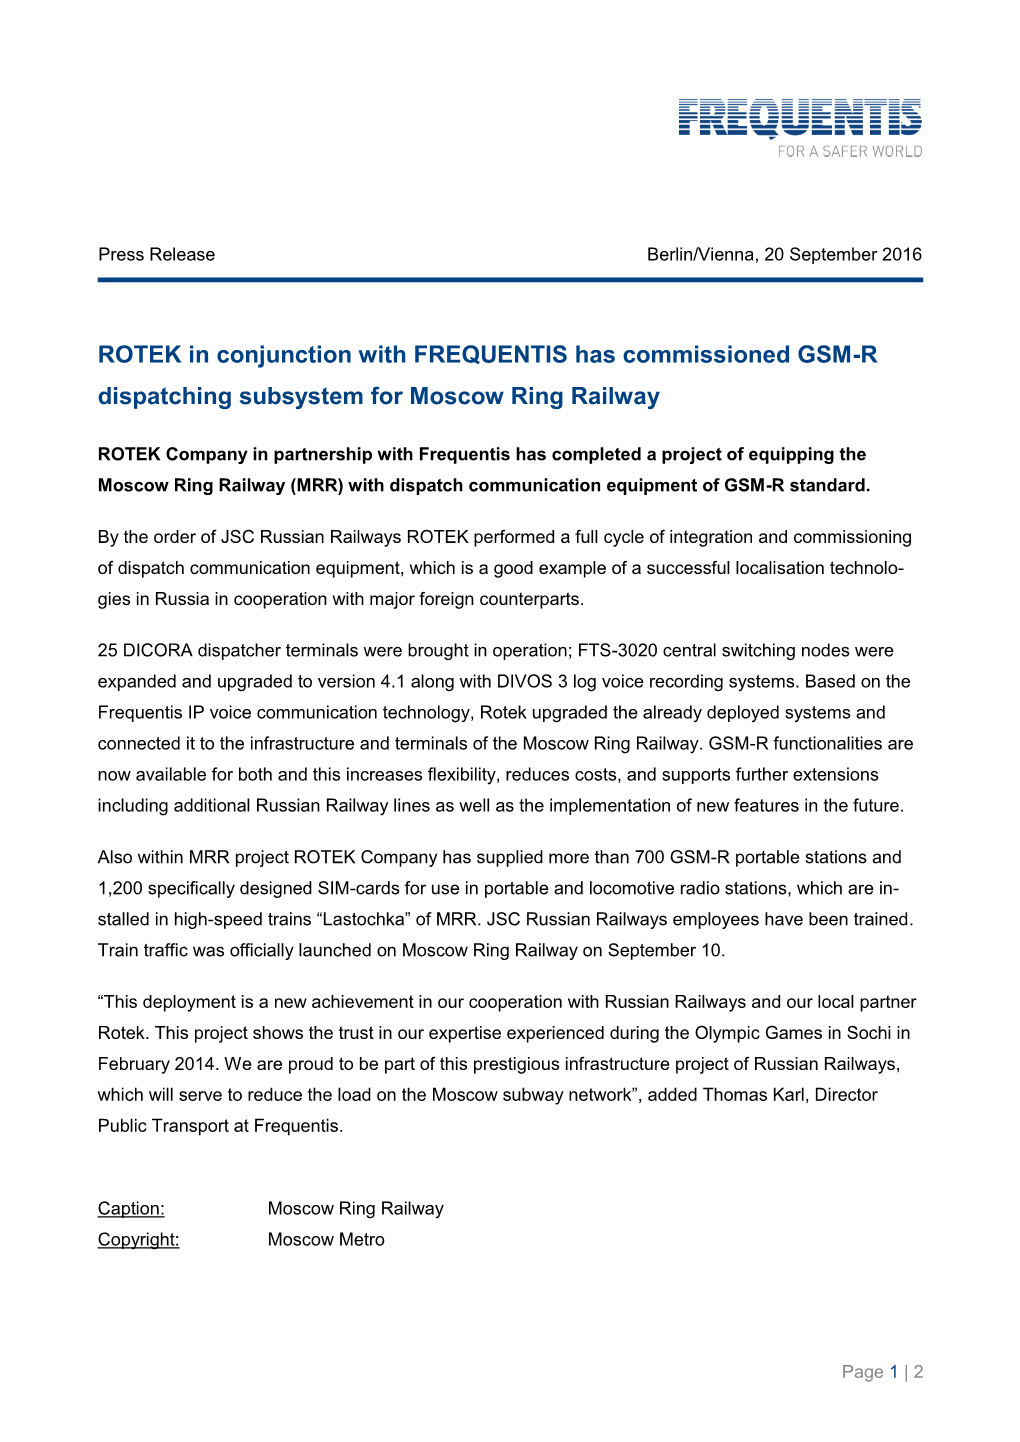 ROTEK in Conjunction with FREQUENTIS Has Commissioned GSM-R Dispatching Subsystem for Moscow Ring Railway